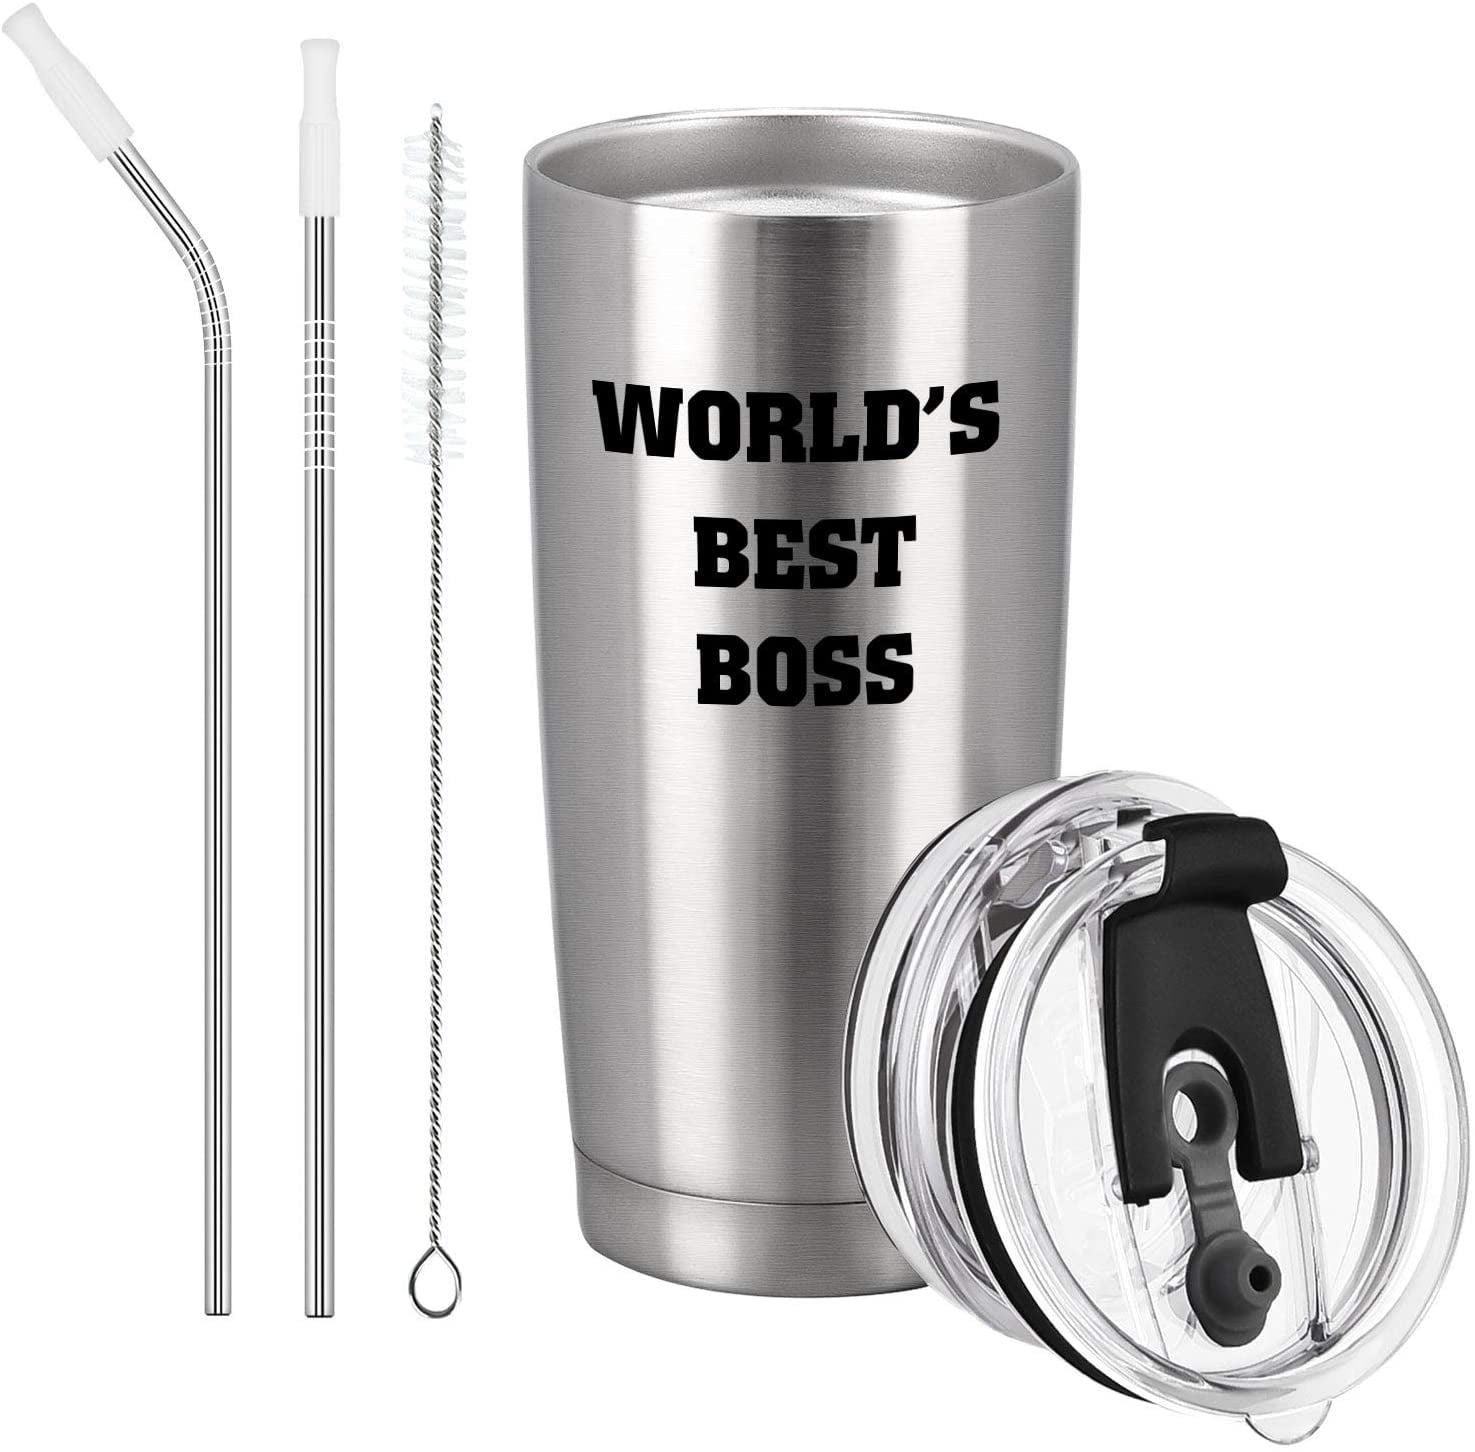 20oz Engraved Stainless Steel Insulated Travel Mug Christmas Office Perfect Boss Idea for Men/Male in Boss Day Birthday Boss Gifts for Men Appreciation